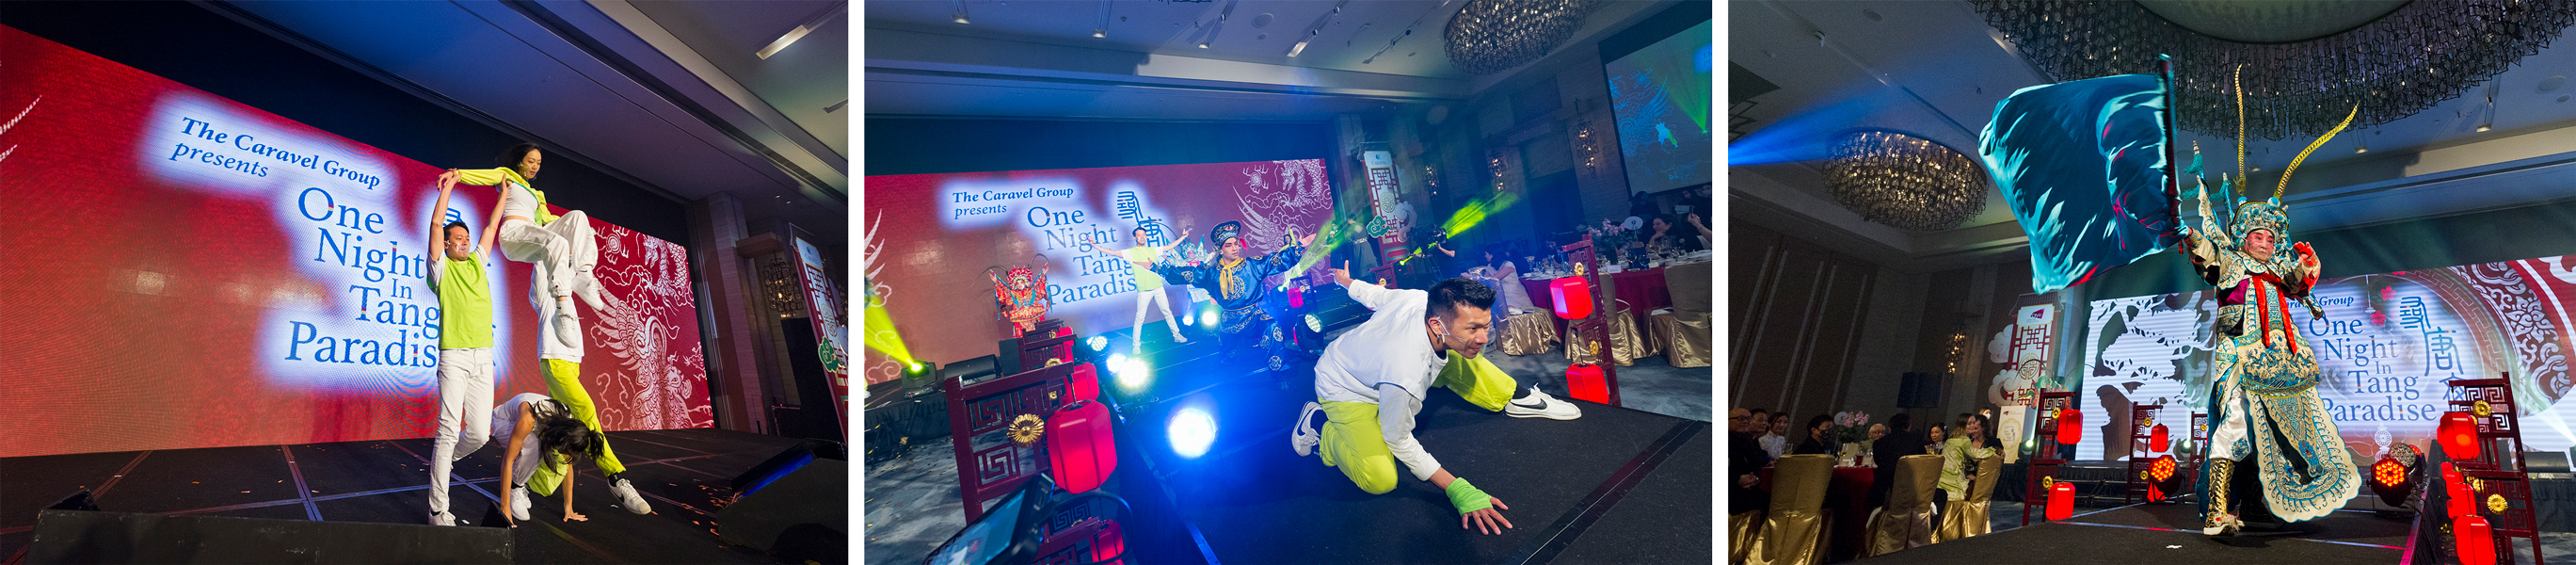 The impressive East-meets-West stage performances created an electrifying evening’s entertainment.